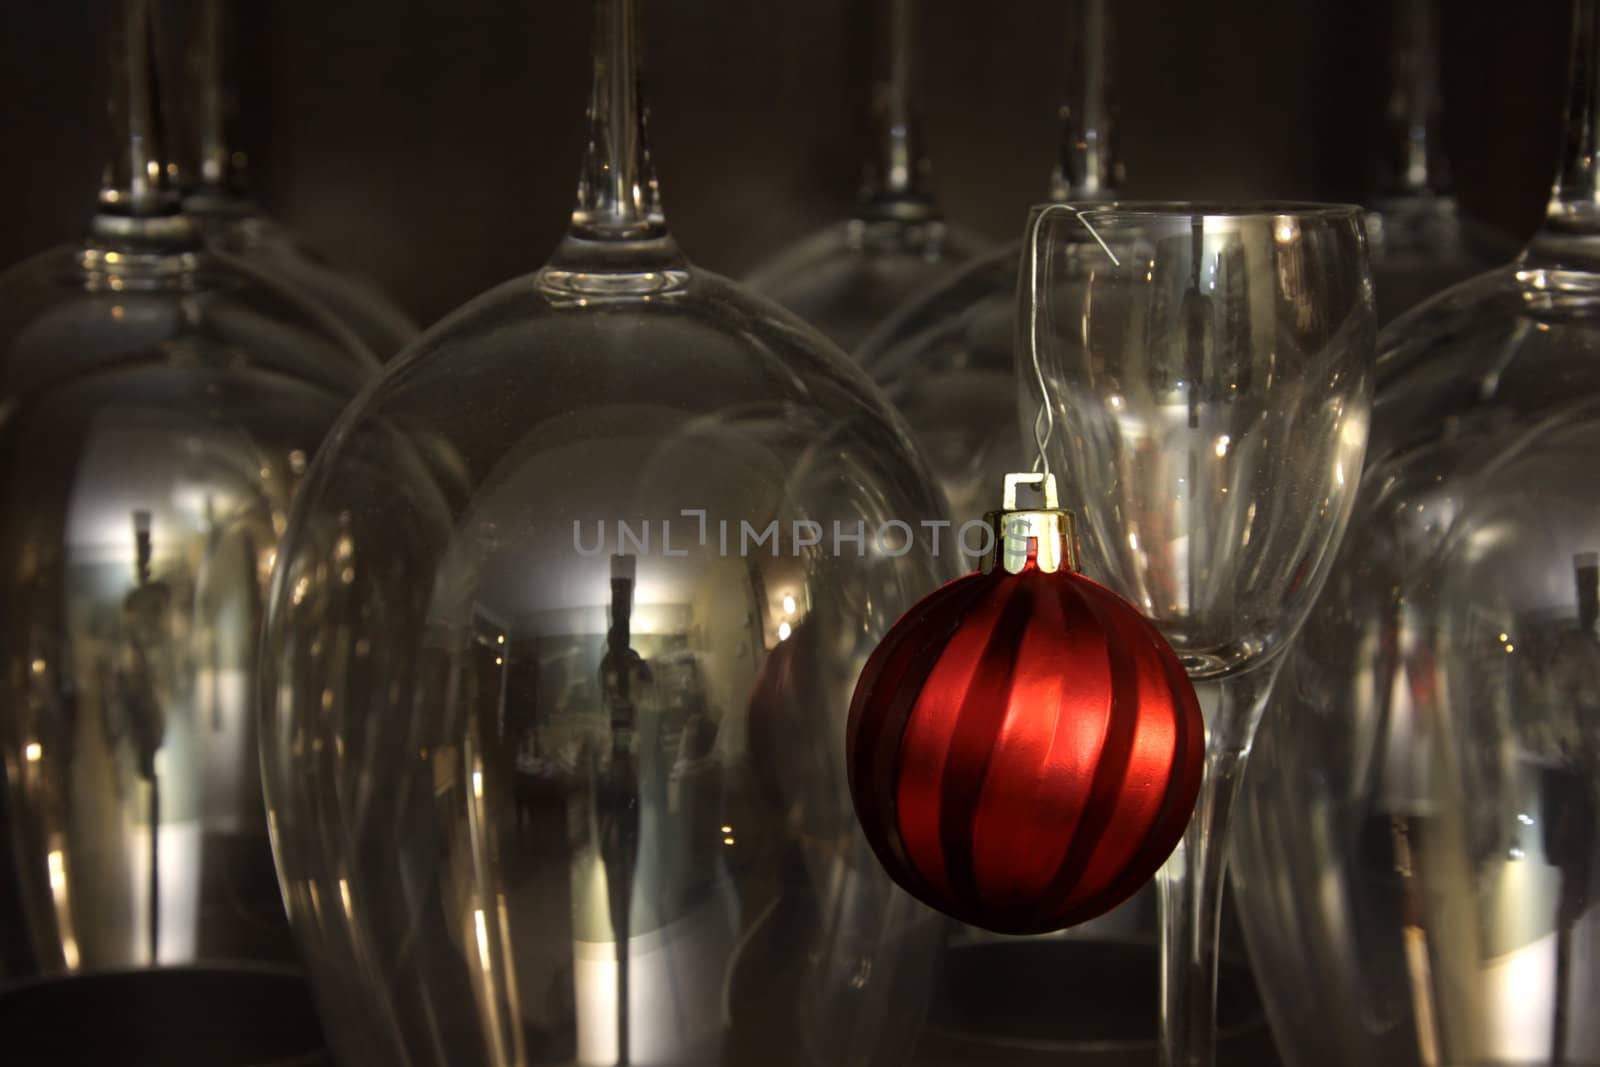 A red Christmas bauble ornament hanging from a dessert glass with wine glasses in the background.
